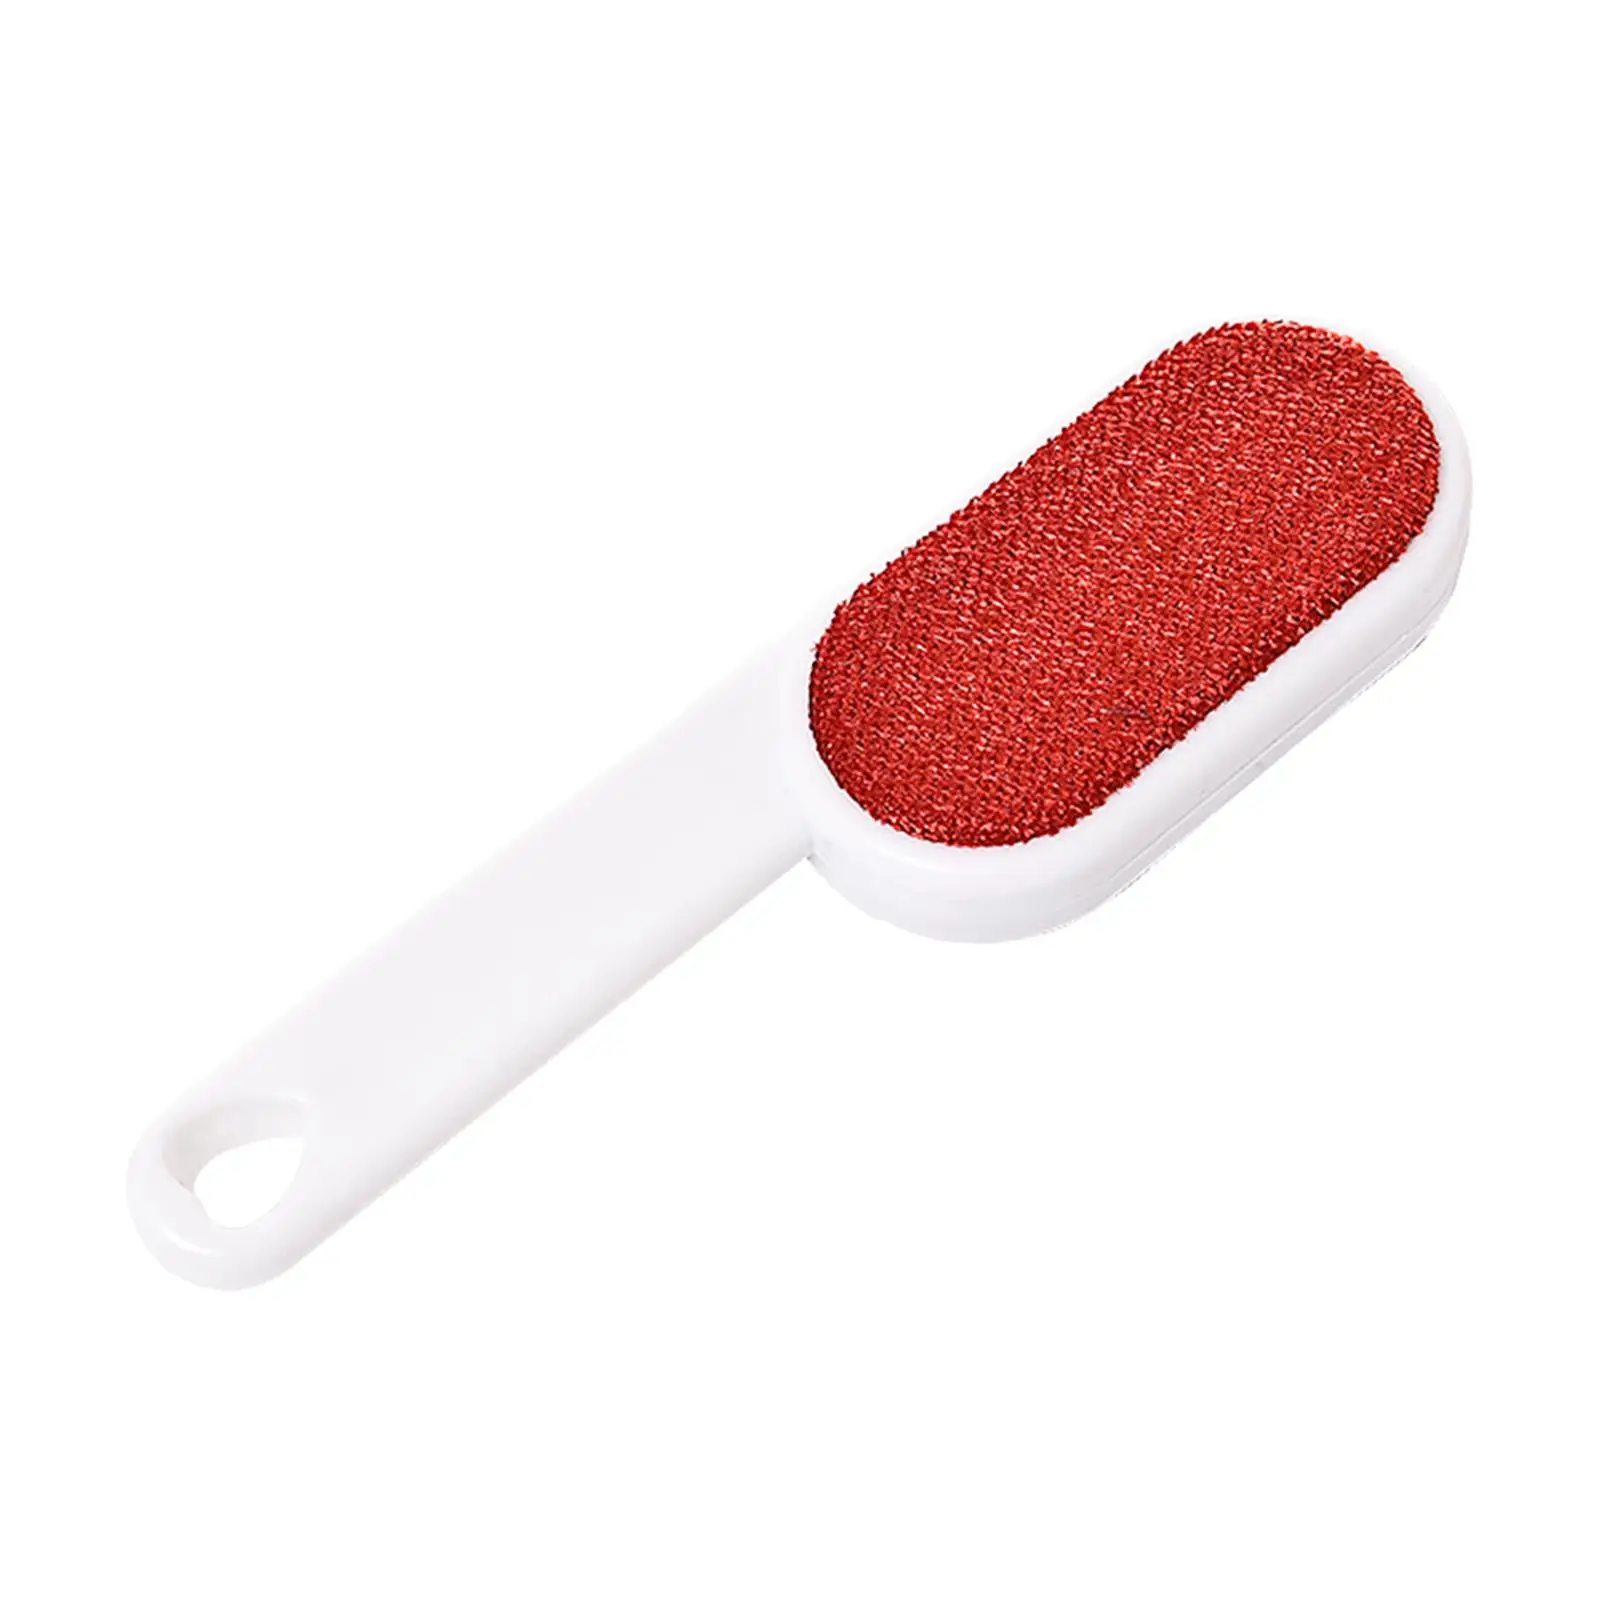 Lint Remover Brush Furniture Sofa Cleaner Brush Handheld Dog Hair Remover Fabric Brush for Blanket Clothing Sweater Couch Sofa